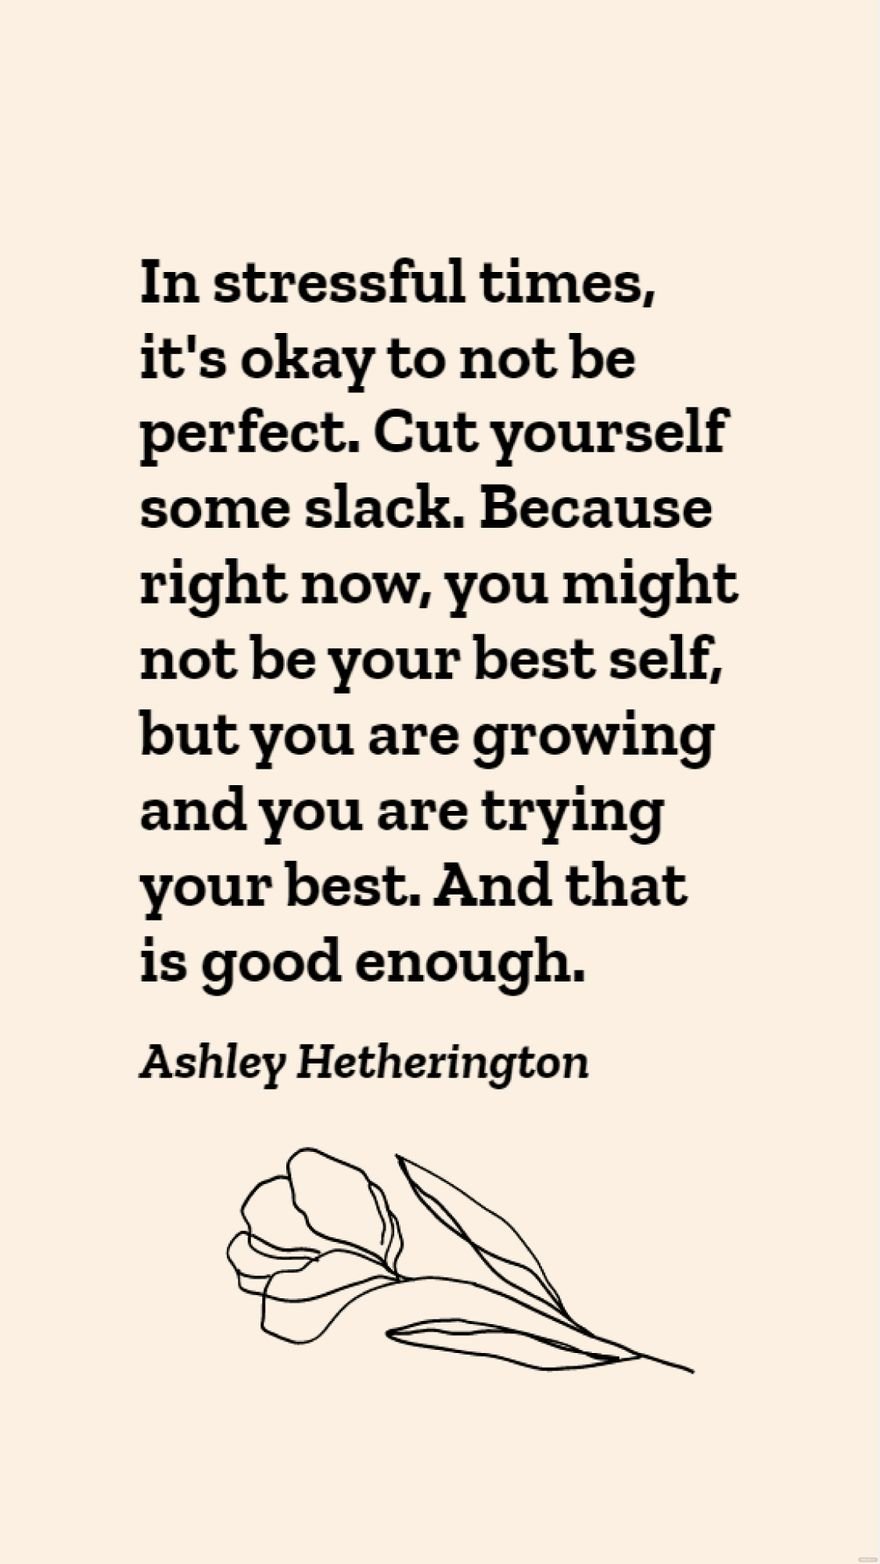 Ashley Hetherington - In stressful times, it's okay to not be perfect. Cut yourself some slack. Because right now, you might not be your best self, but you are growing and you are trying your best. An